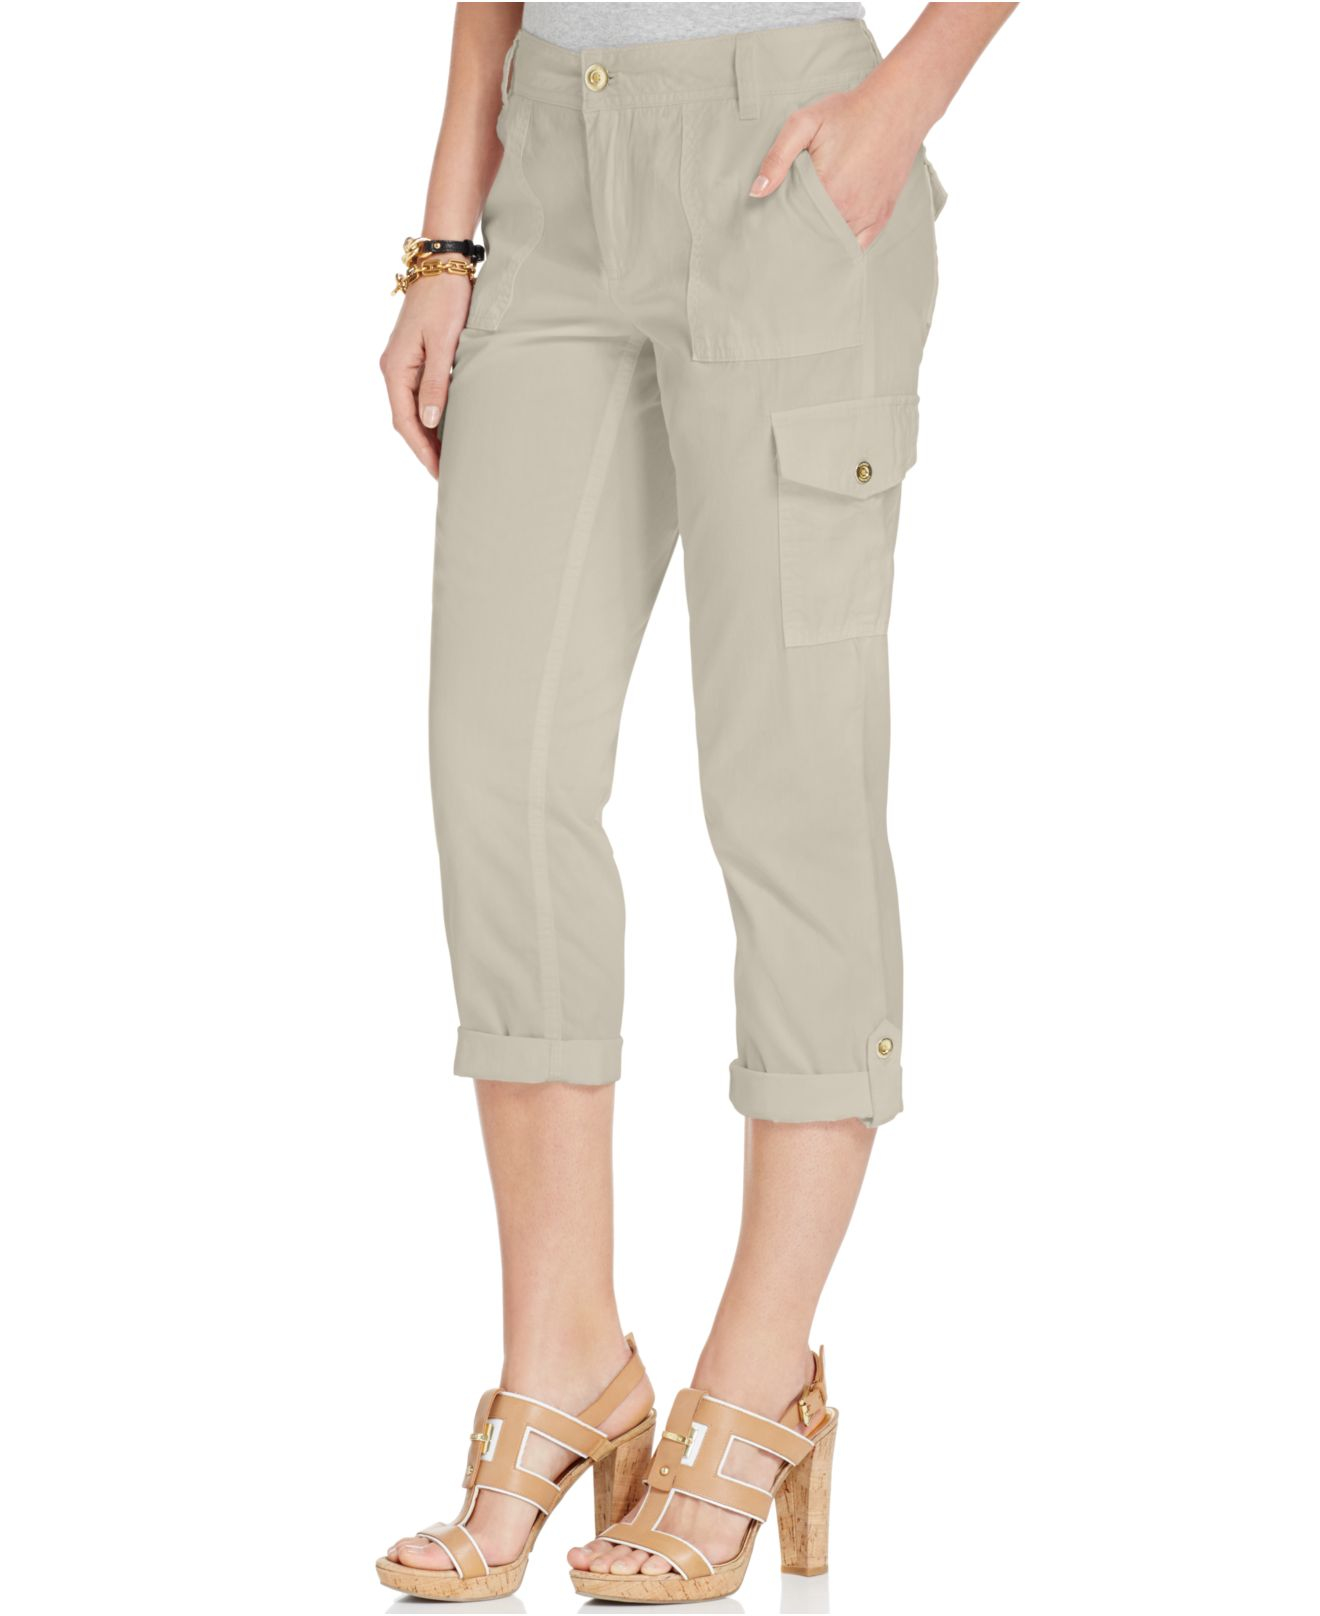 Lyst - Tommy Hilfiger Cropped Roll-tab Cargo Pants in Natural